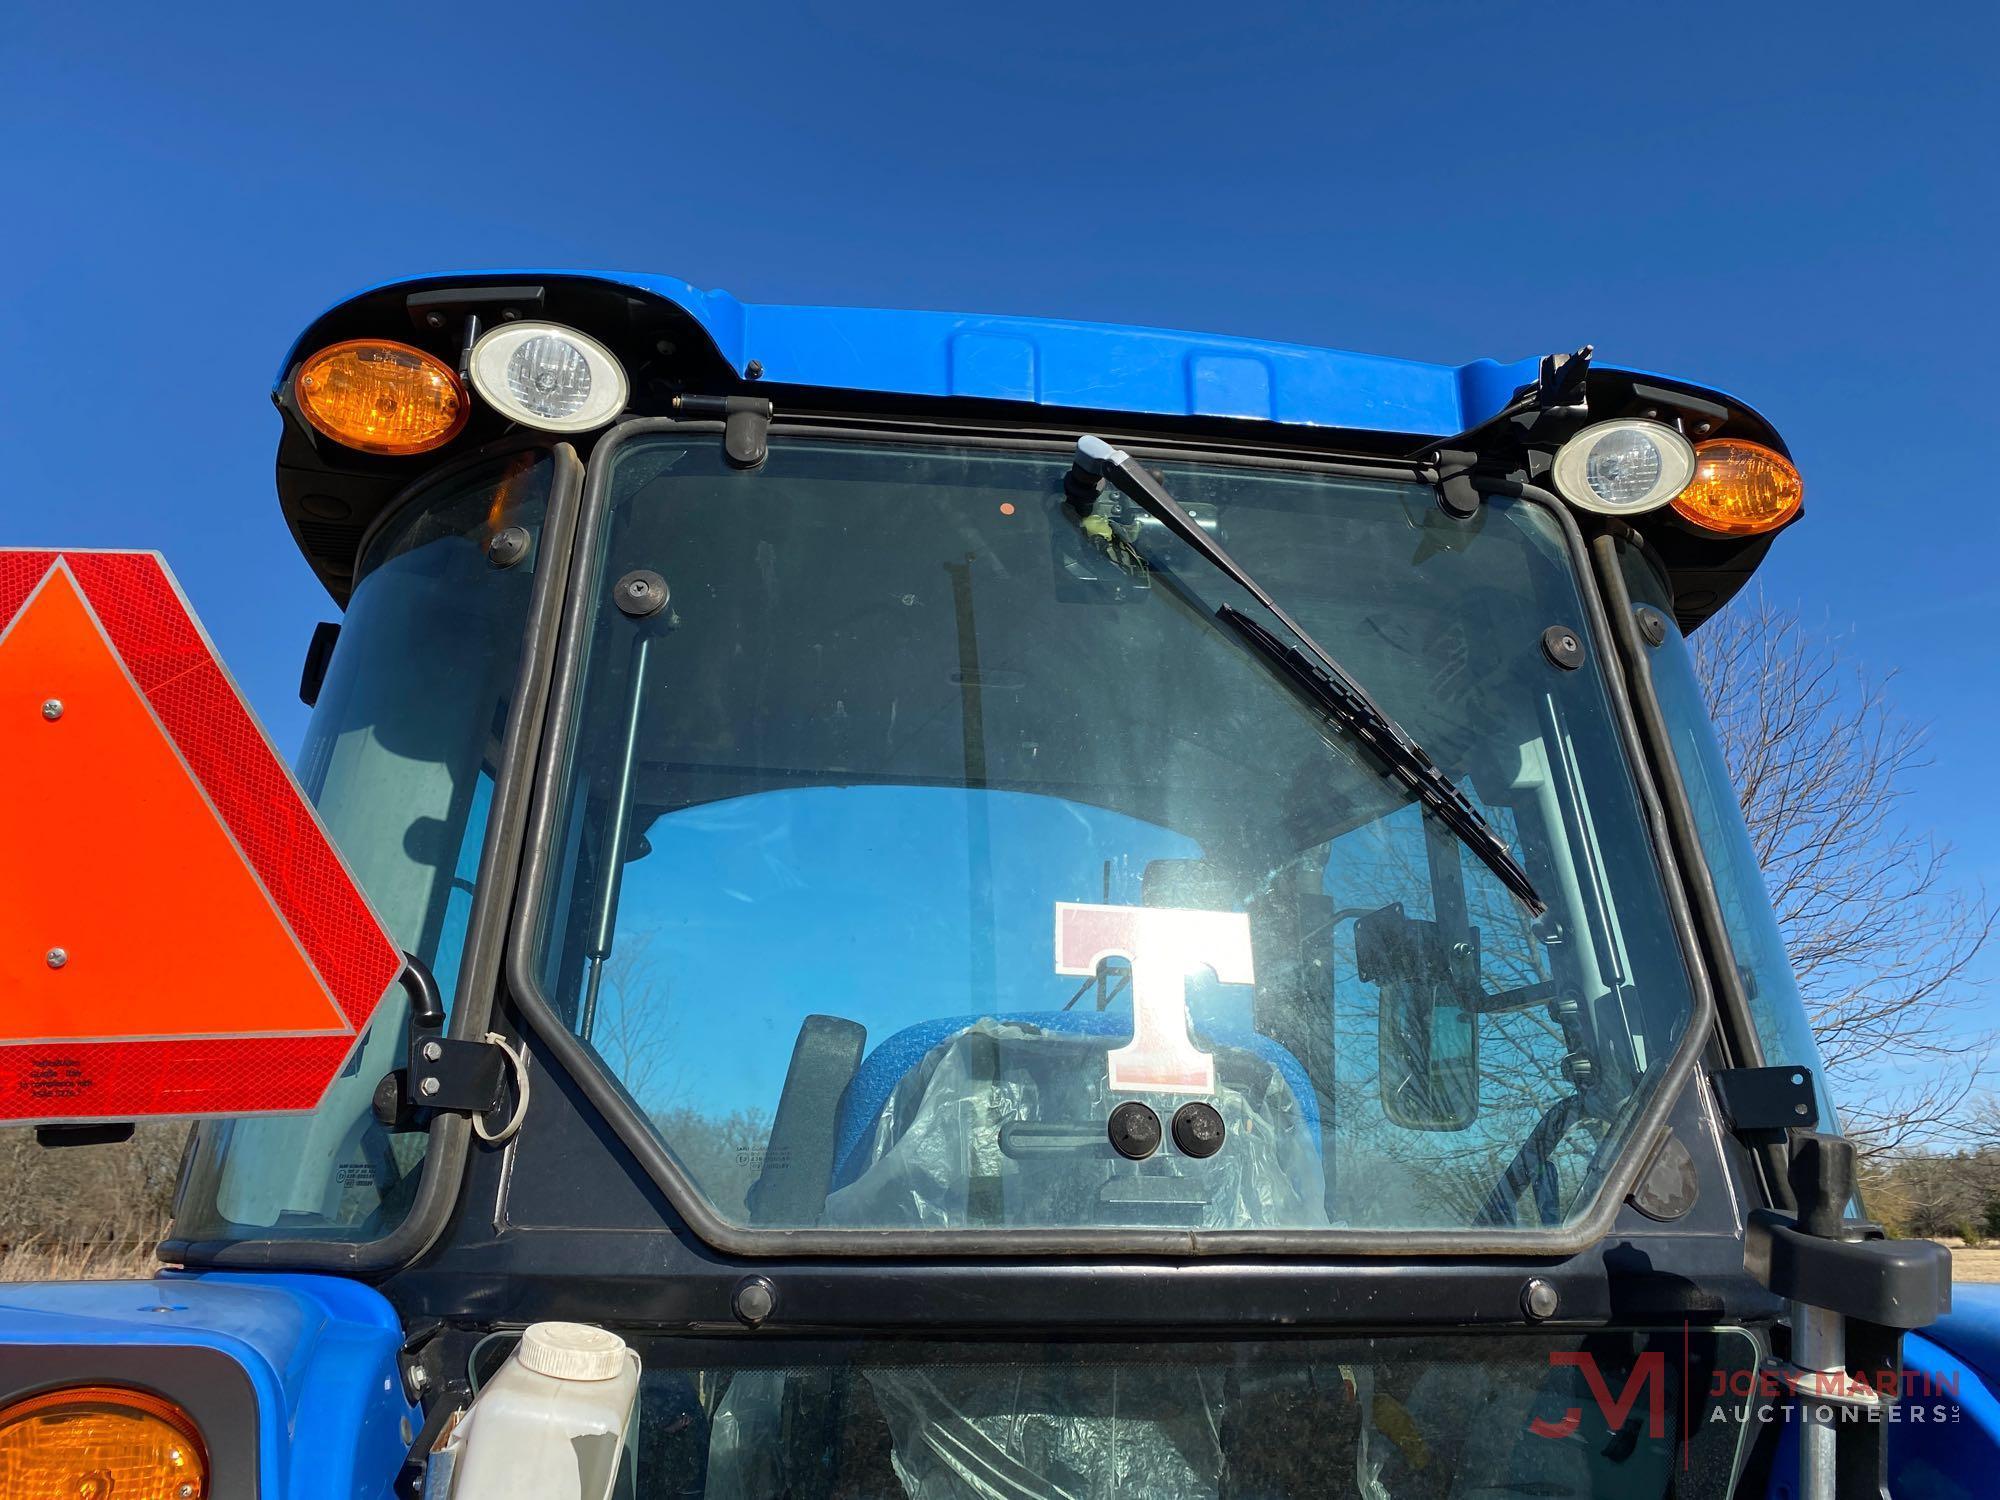 NEW HOLLAND T4.75 UTILITY TRACTOR